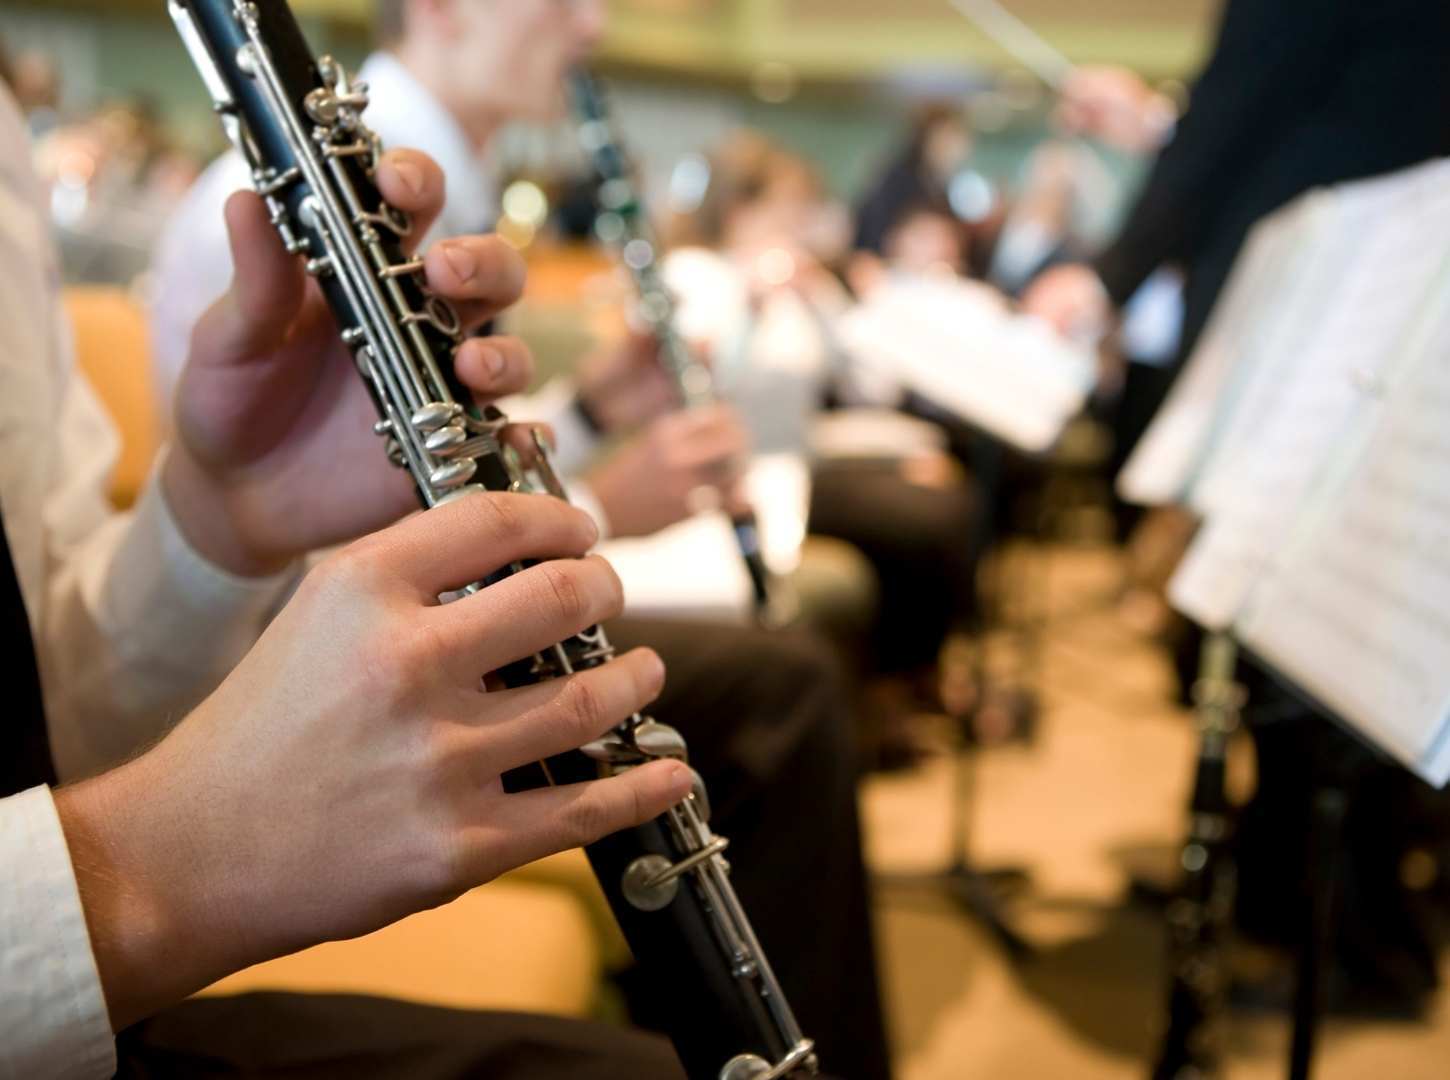 Musician playing the clarinet in an orchestra